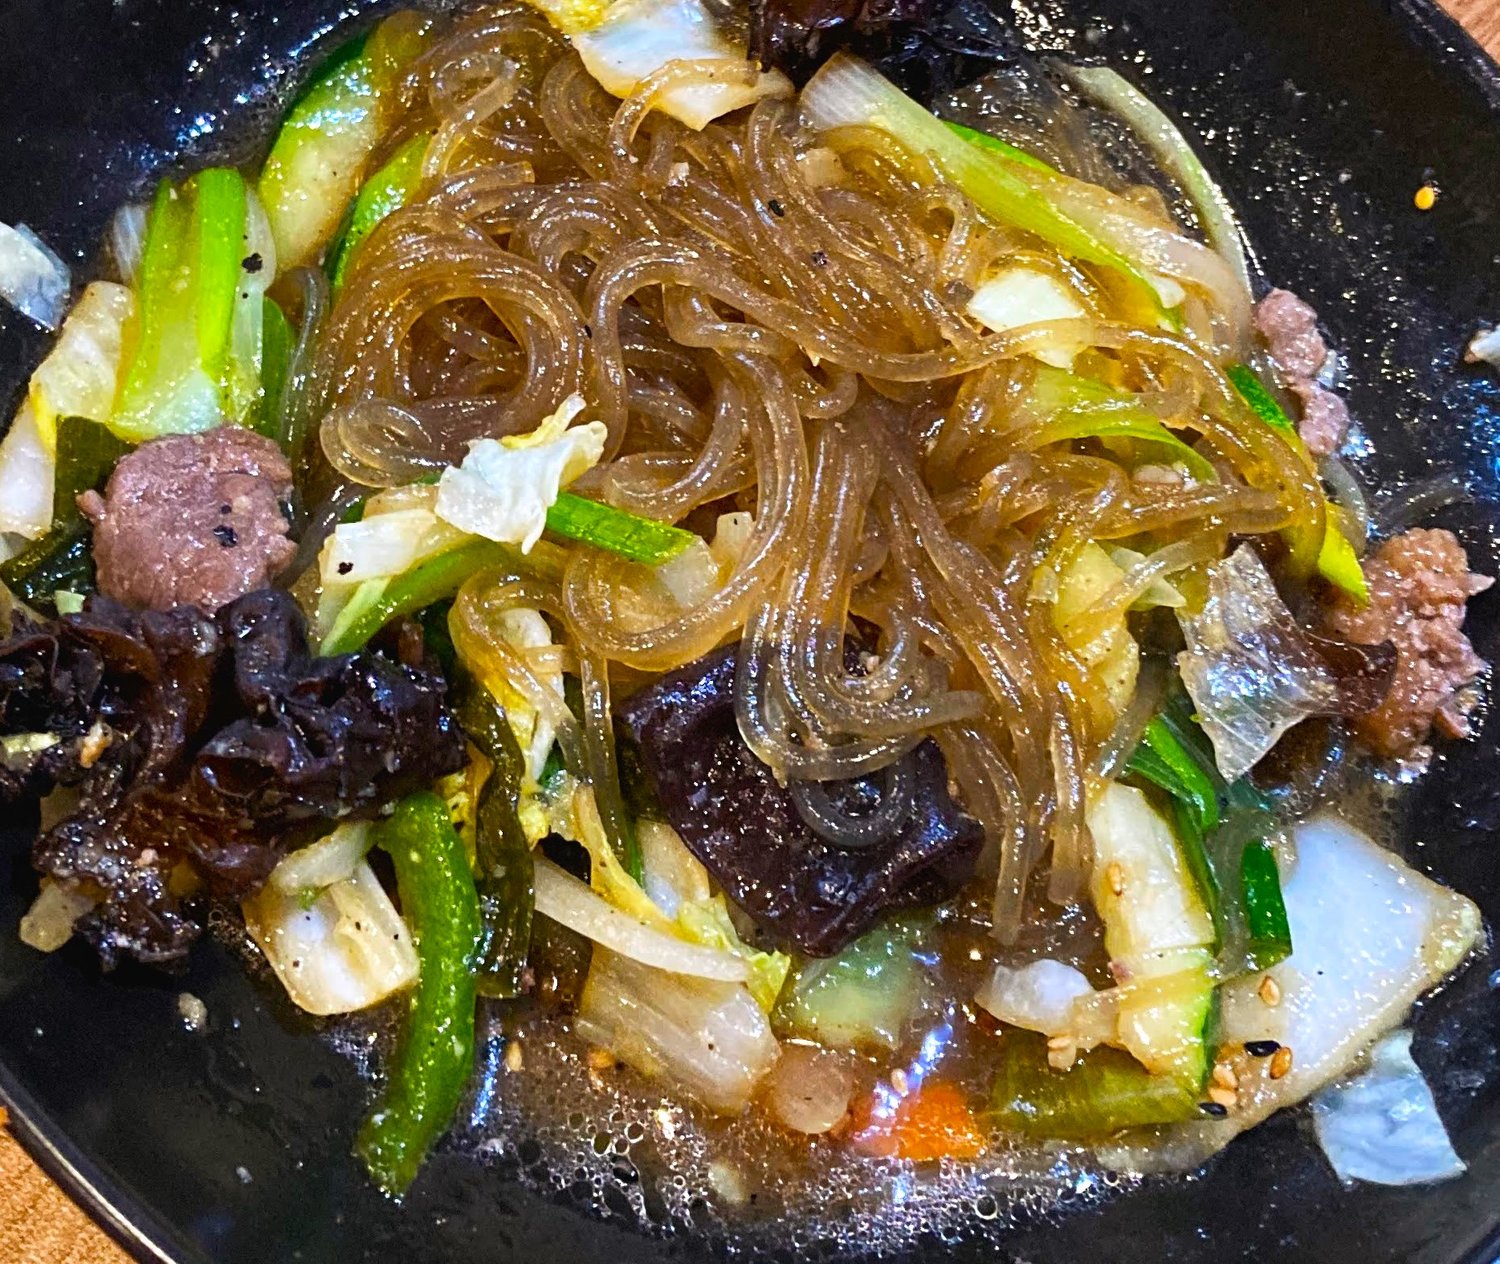 Japchae, a Korean dish consisting of stir-fried glass noodles, meat and assorted vegetables, wows with its unique textures and flavors.